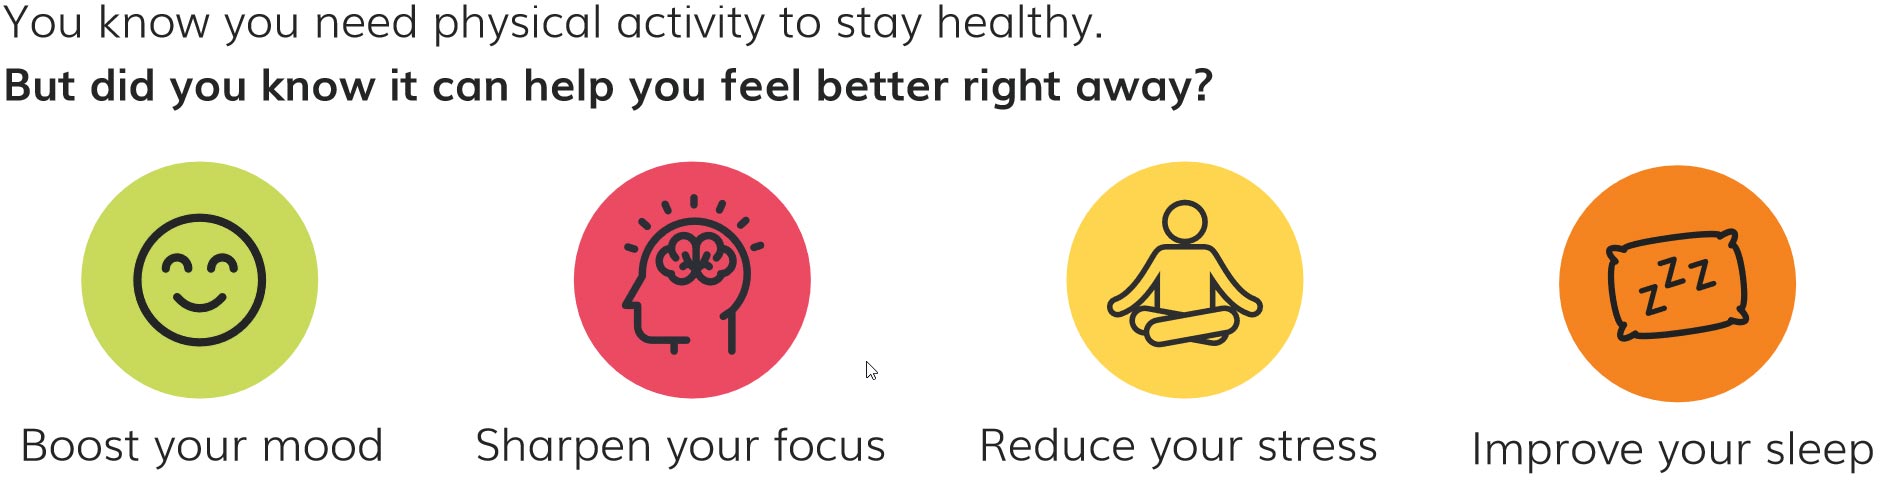 You know you need physical activity to stay healthy. But did you know it can help you feel better right away? Boost you mood. Sharpen your focus. Reduce your stress. Improve your sleep.